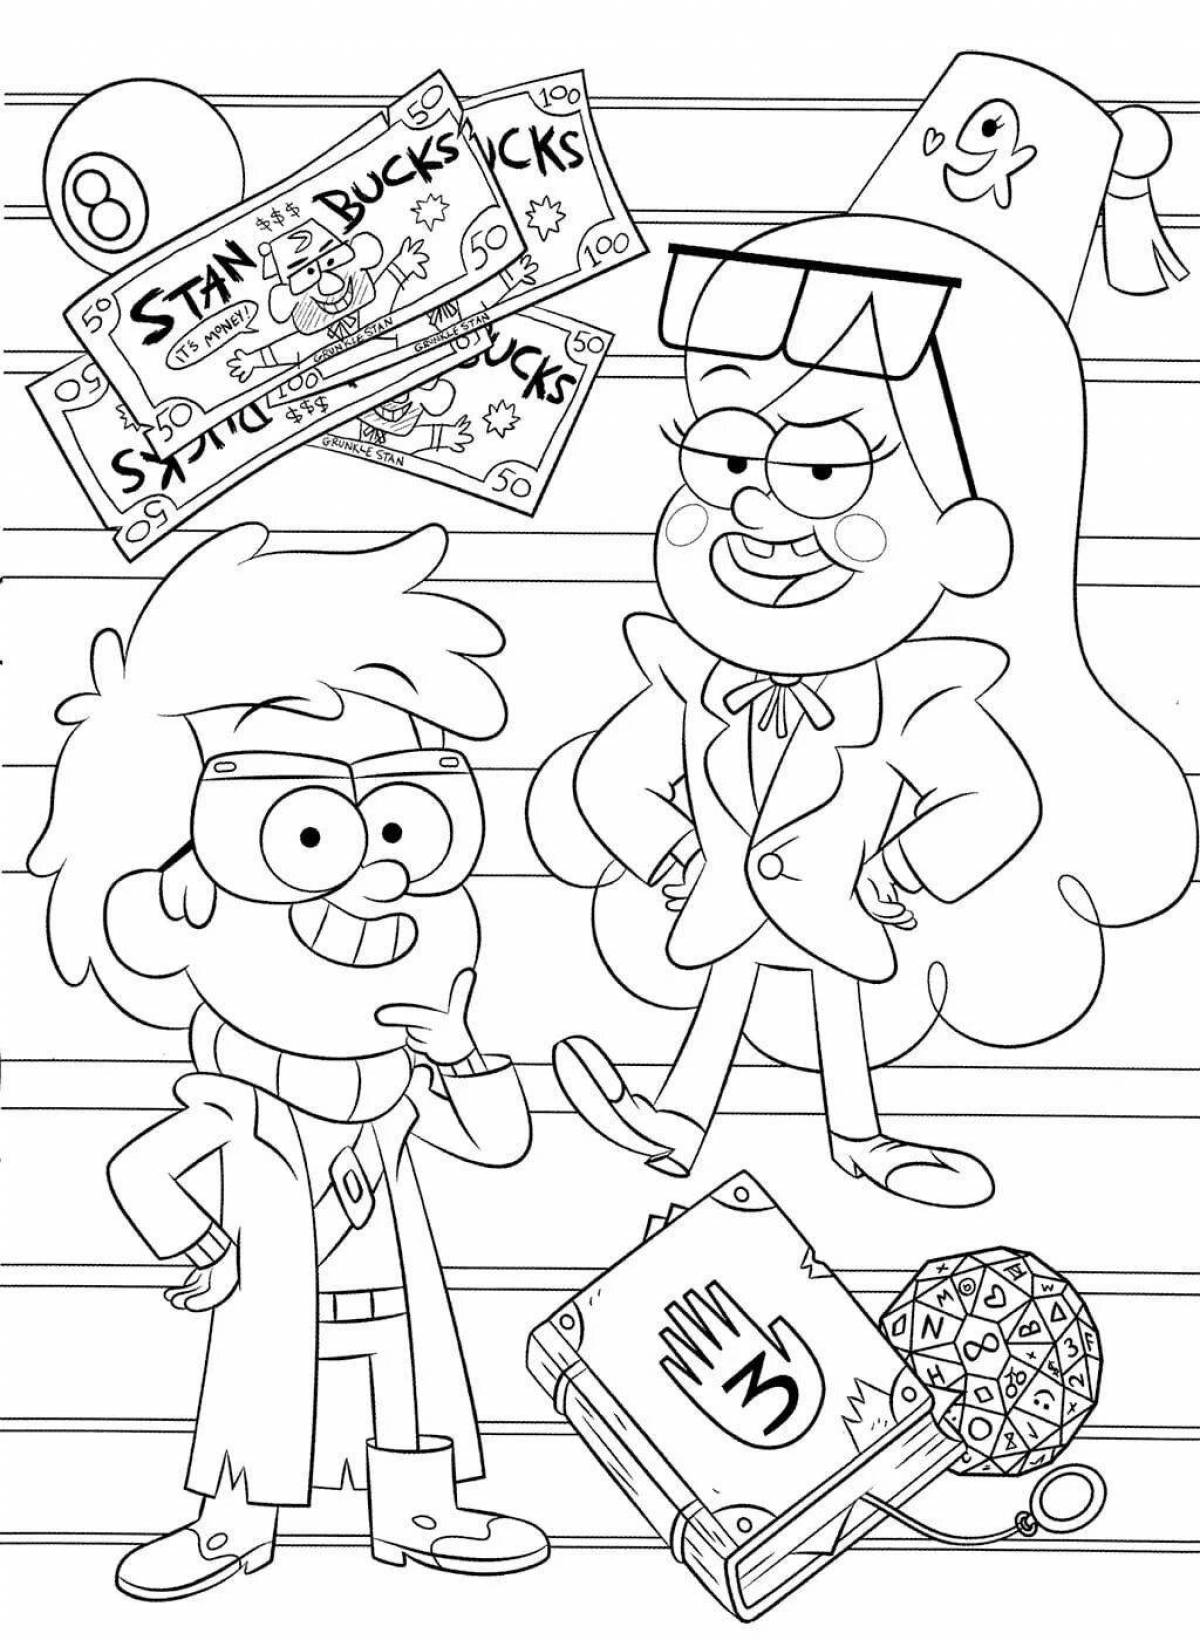 Cute gravity falls coloring page